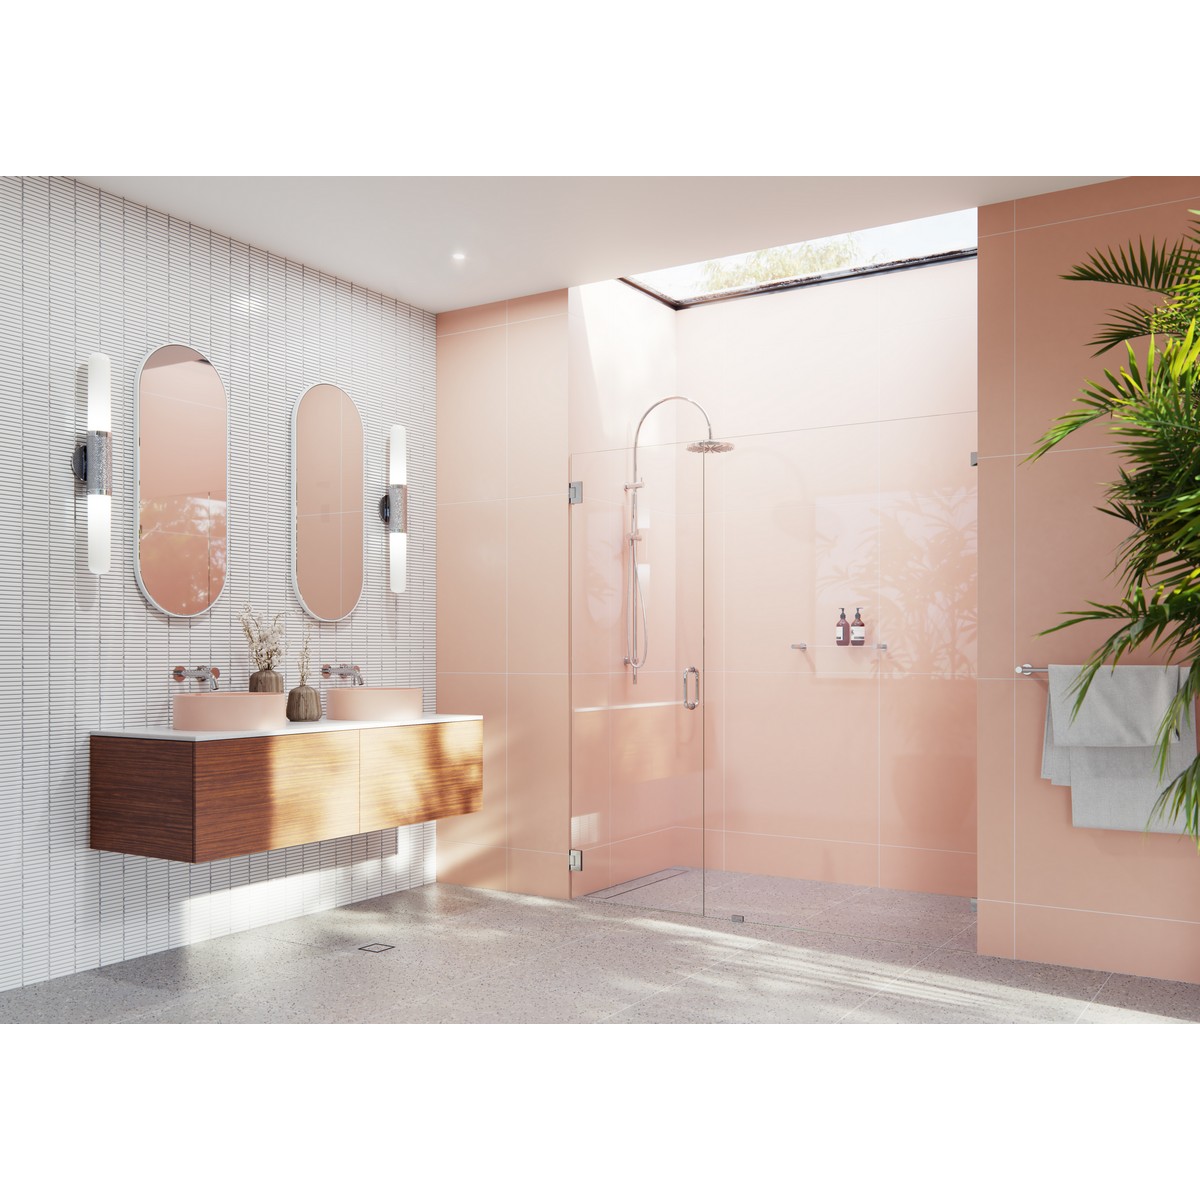 GLASS WAREHOUSE GW-WH-73 ILLUME 73 W X 78 H WALL HINGED FULLY FRAMELESS GLASS SHOWER ENCLOSURE